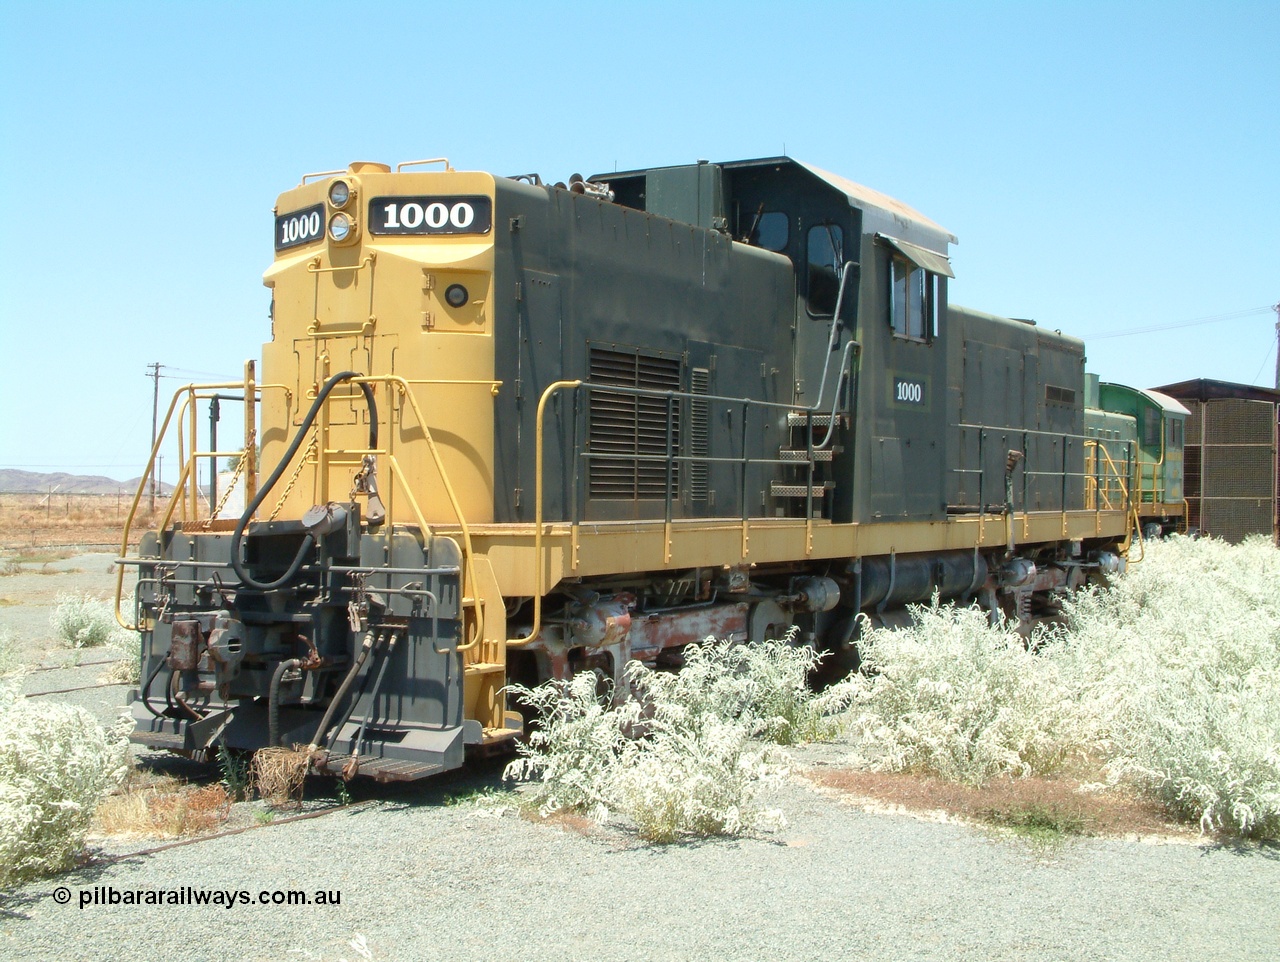 041014 122512
Pilbara Railways Historical Society, former ALCo built demonstrator locomotive model C-415 serial 3449-1 built April 1966, currently carrying number 1000, it was originally numbered 008 when Hamersley Iron purchased the unit in 1968. It was retired from service on the 24th February 1982. It then spent some time carrying number 2000 while building the Marandoo railway line from Sept 1991. 14th October 2004.
Keywords: 1000;ALCo;C-415;3449-1;008;2000;